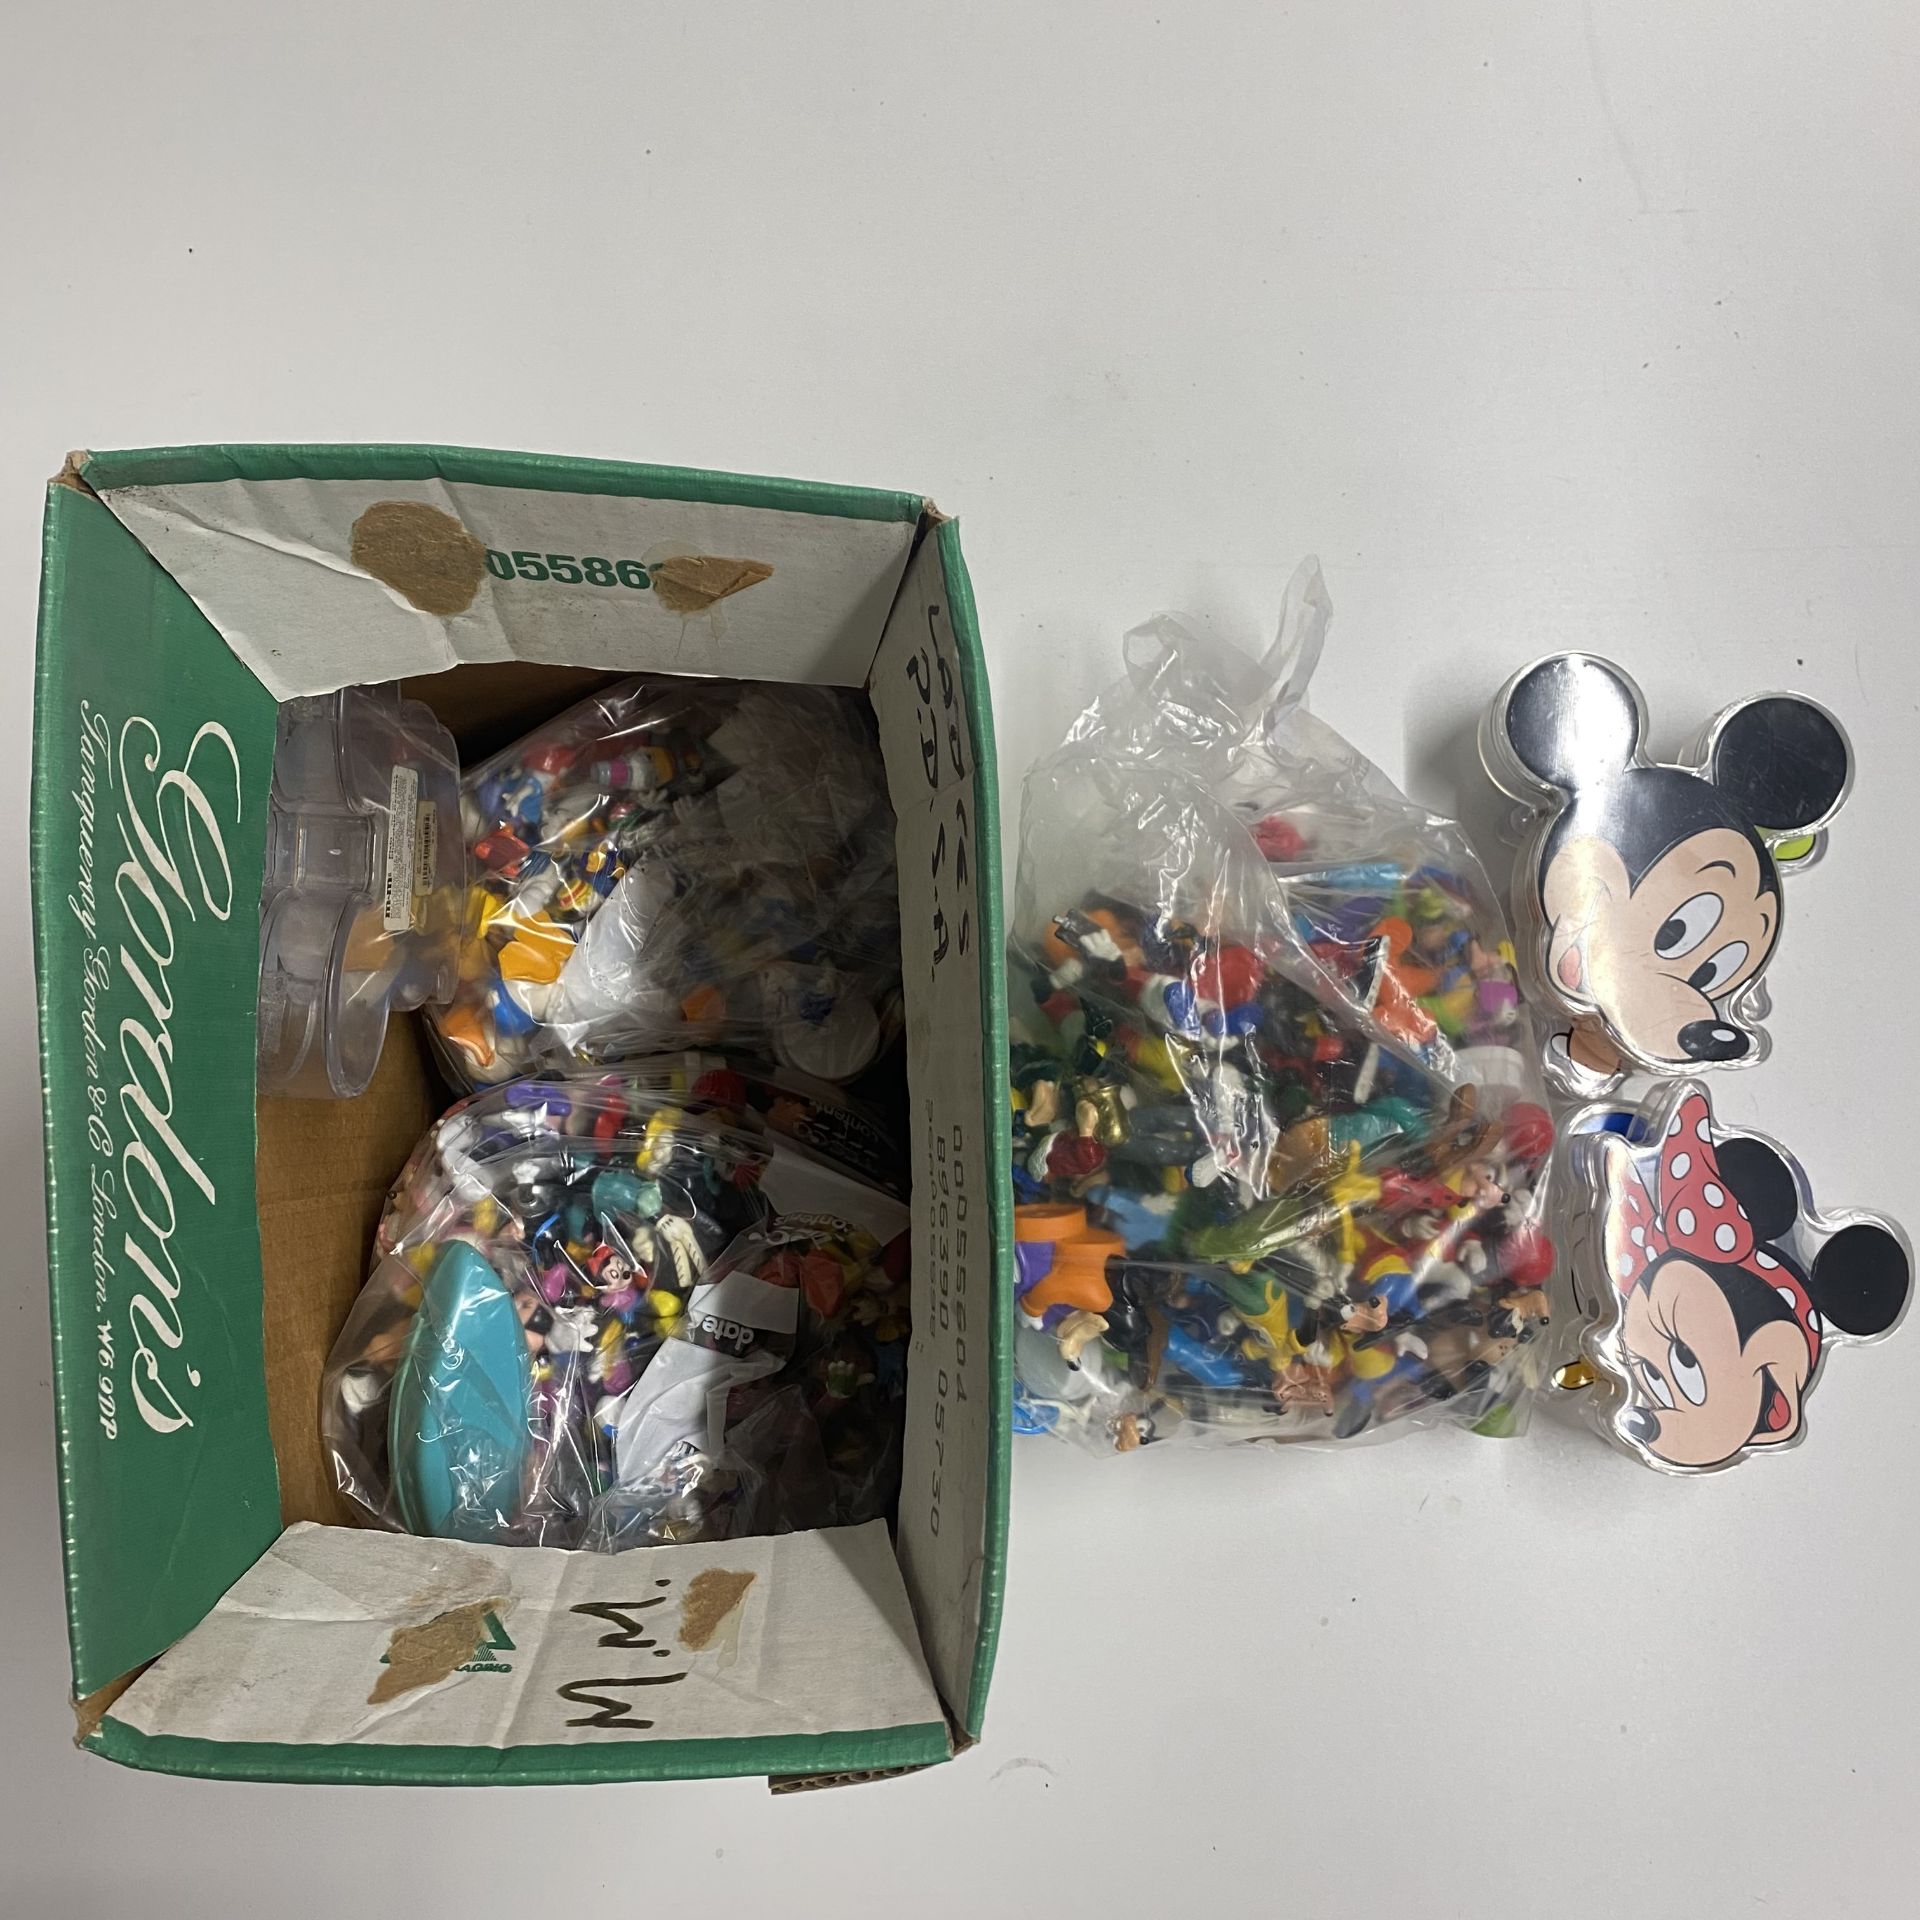 A large collection of Disney characters including Mickey Mouse, Donald Duck and Goof